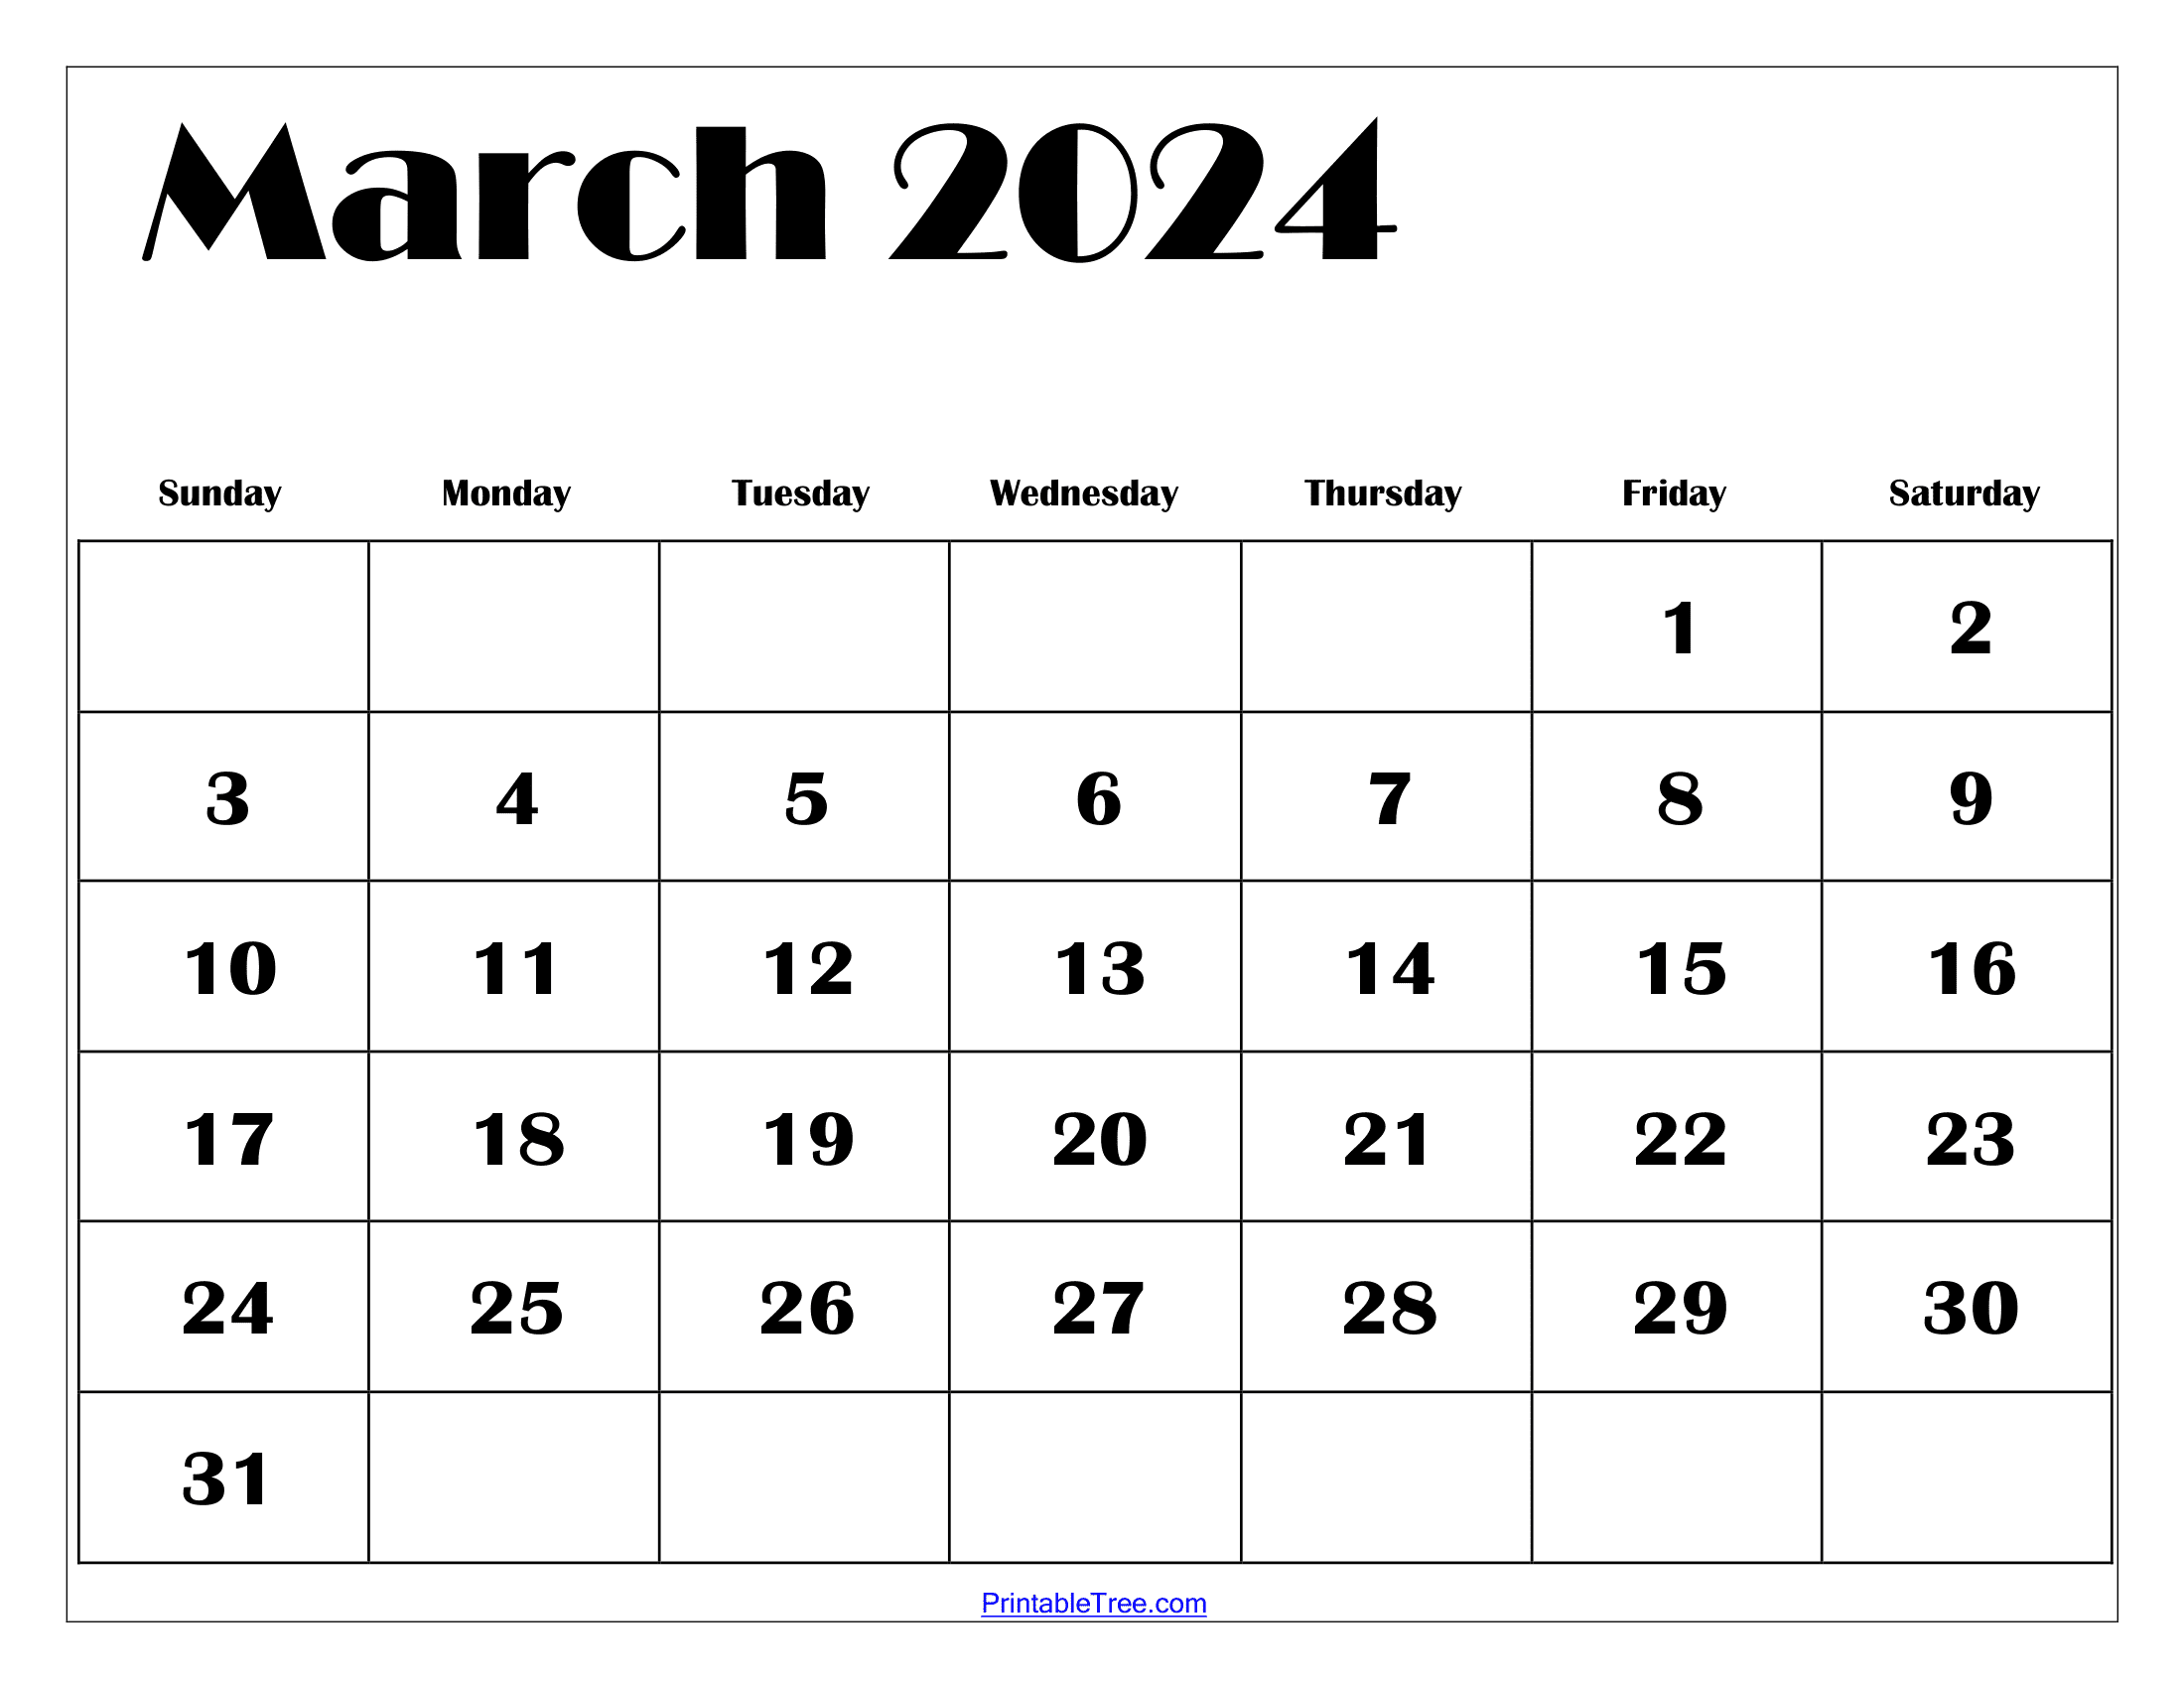 March 2024 Calendar Printable Pdf With Holidays Template Free for March 2024 Calendar Printable Free